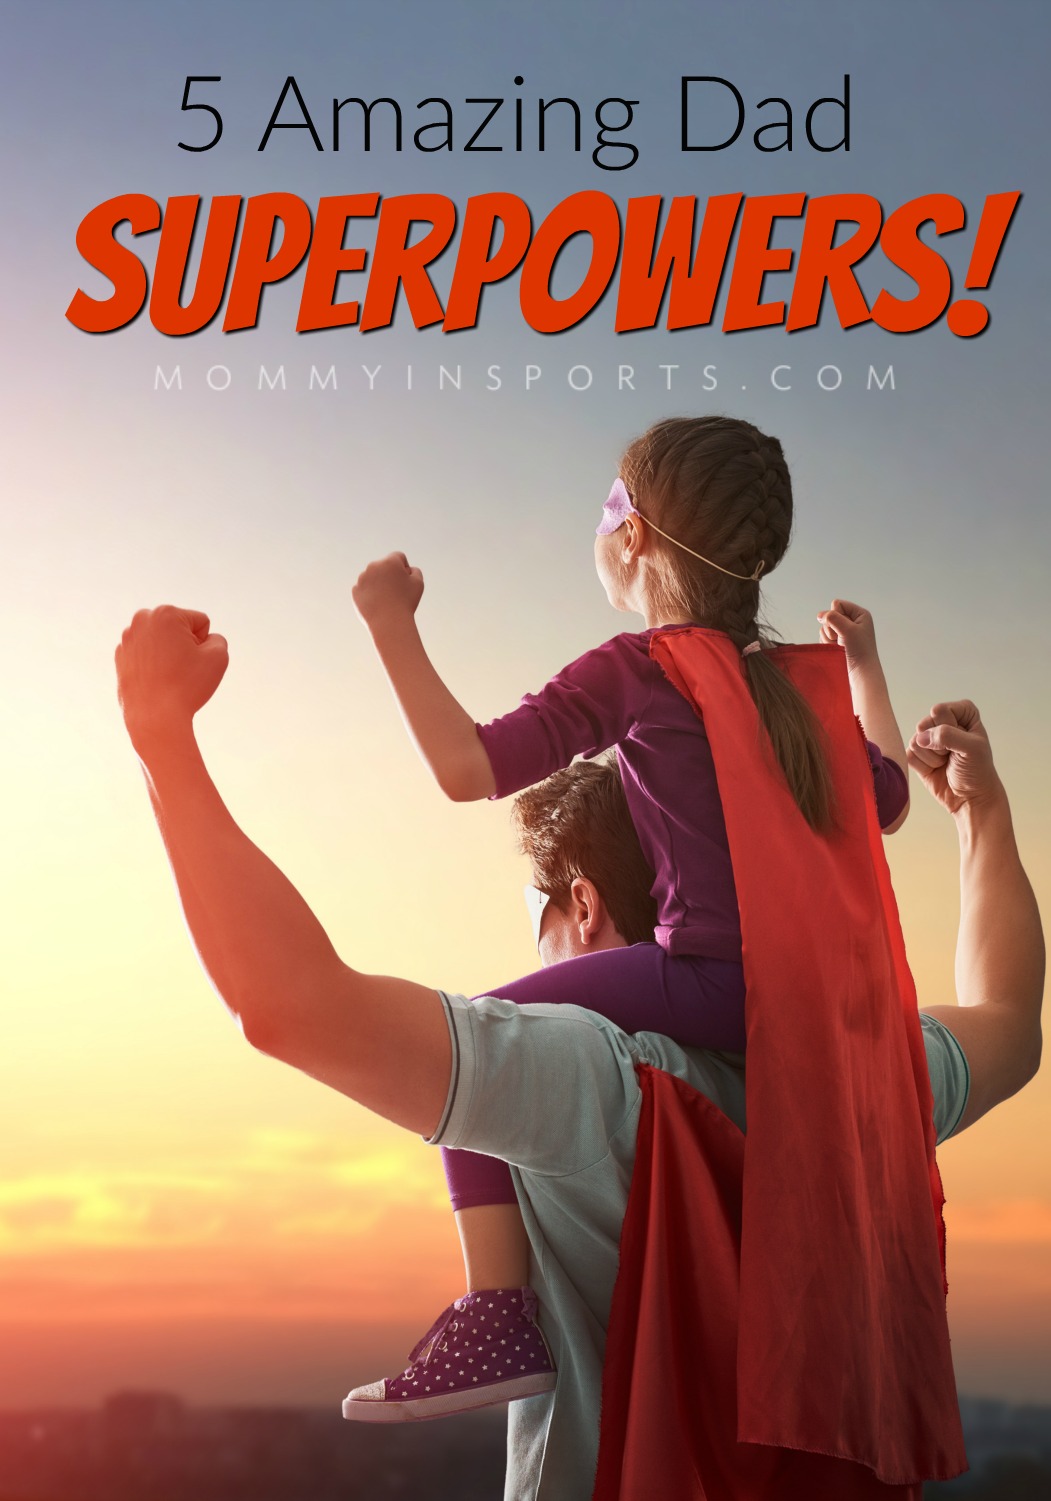 Dads have the most amazing superpowers! And with Father's Day coming up, it's time to unleash their secrets with the world!